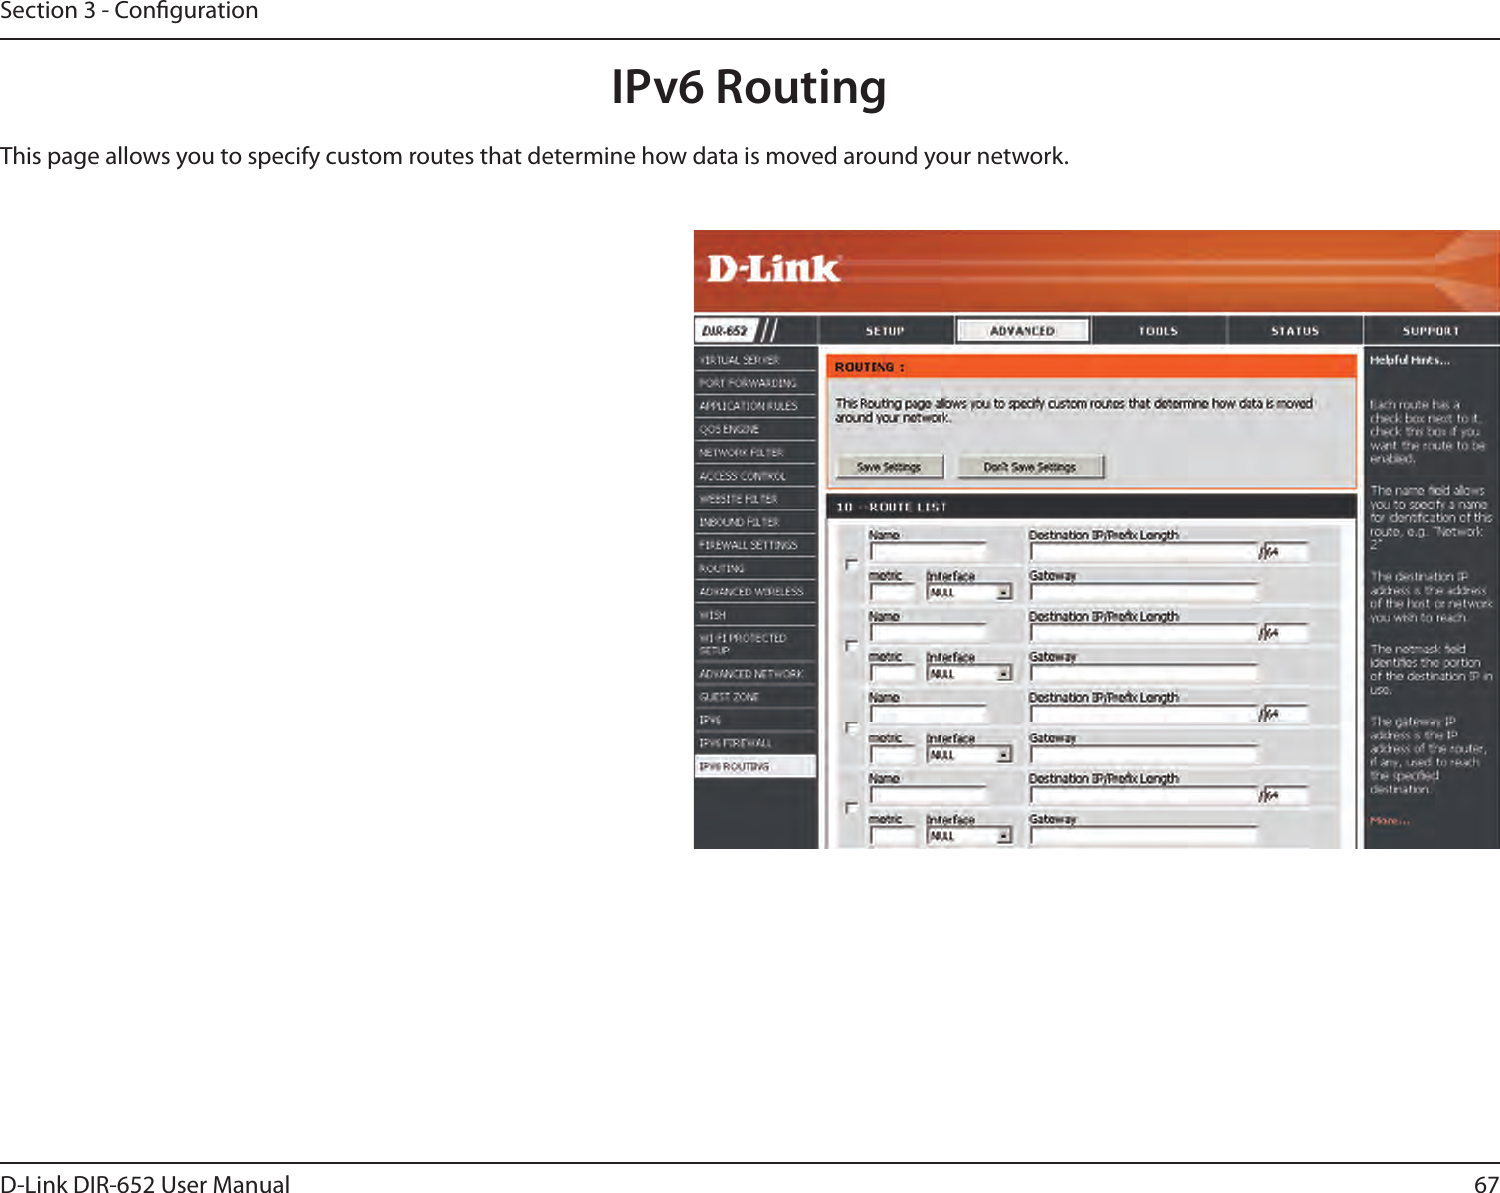 67D-Link DIR-652 User ManualSection 3 - CongurationIPv6 RoutingThis page allows you to specify custom routes that determine how data is moved around your network. 